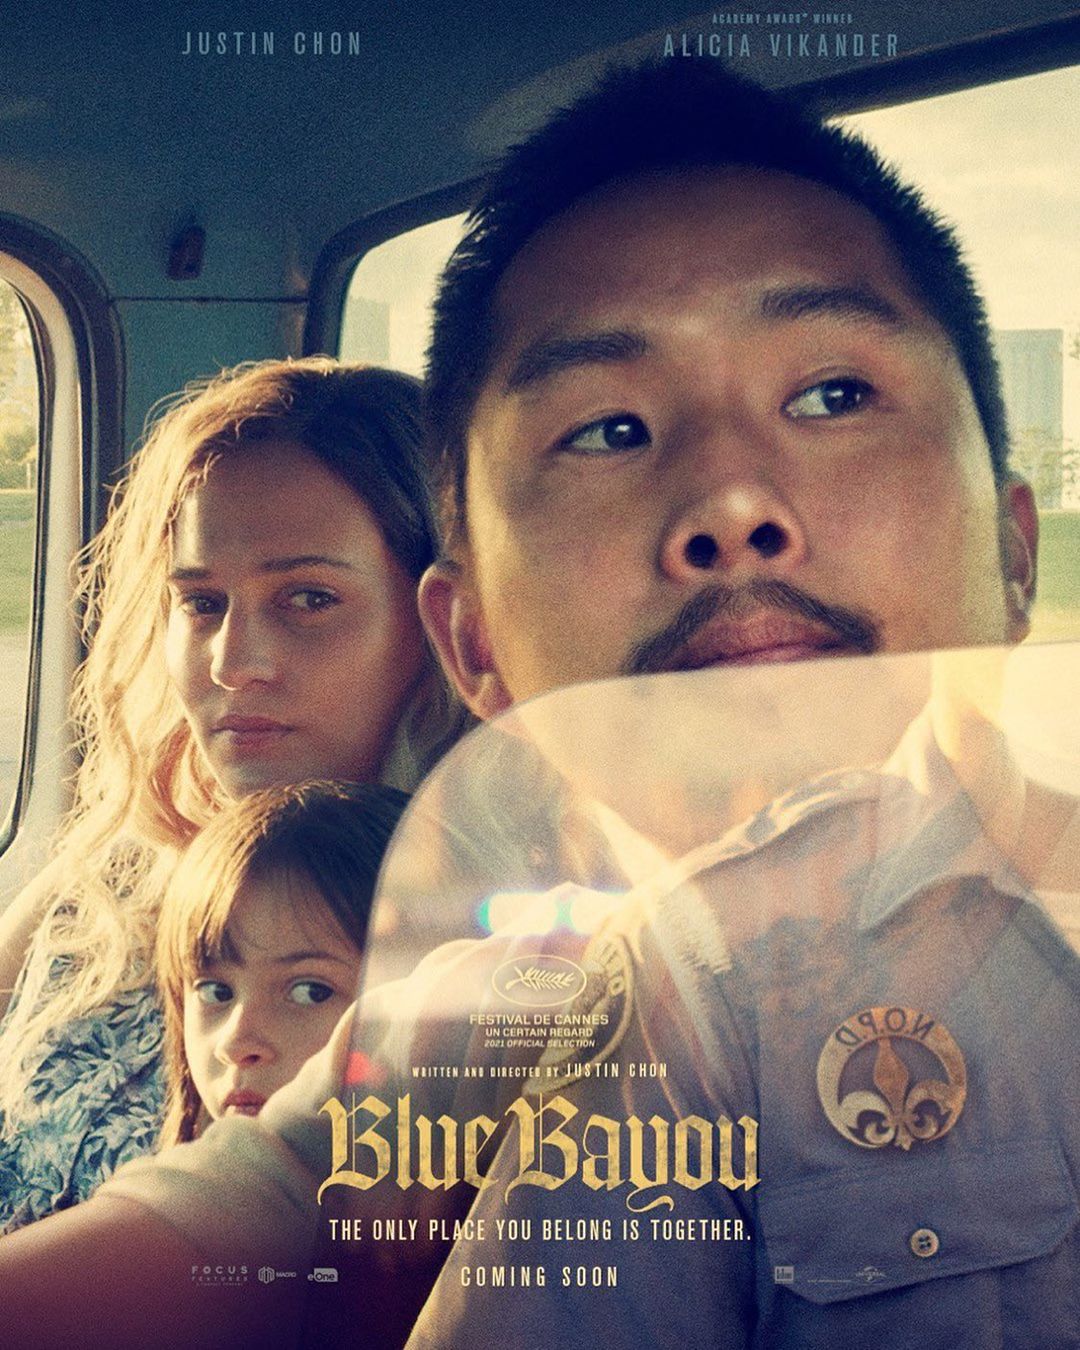 First official poster for Alicia’s upcoming movie ‘Blue Bayou’. The movie premieres at Cannes Film Festival on Tuesday.